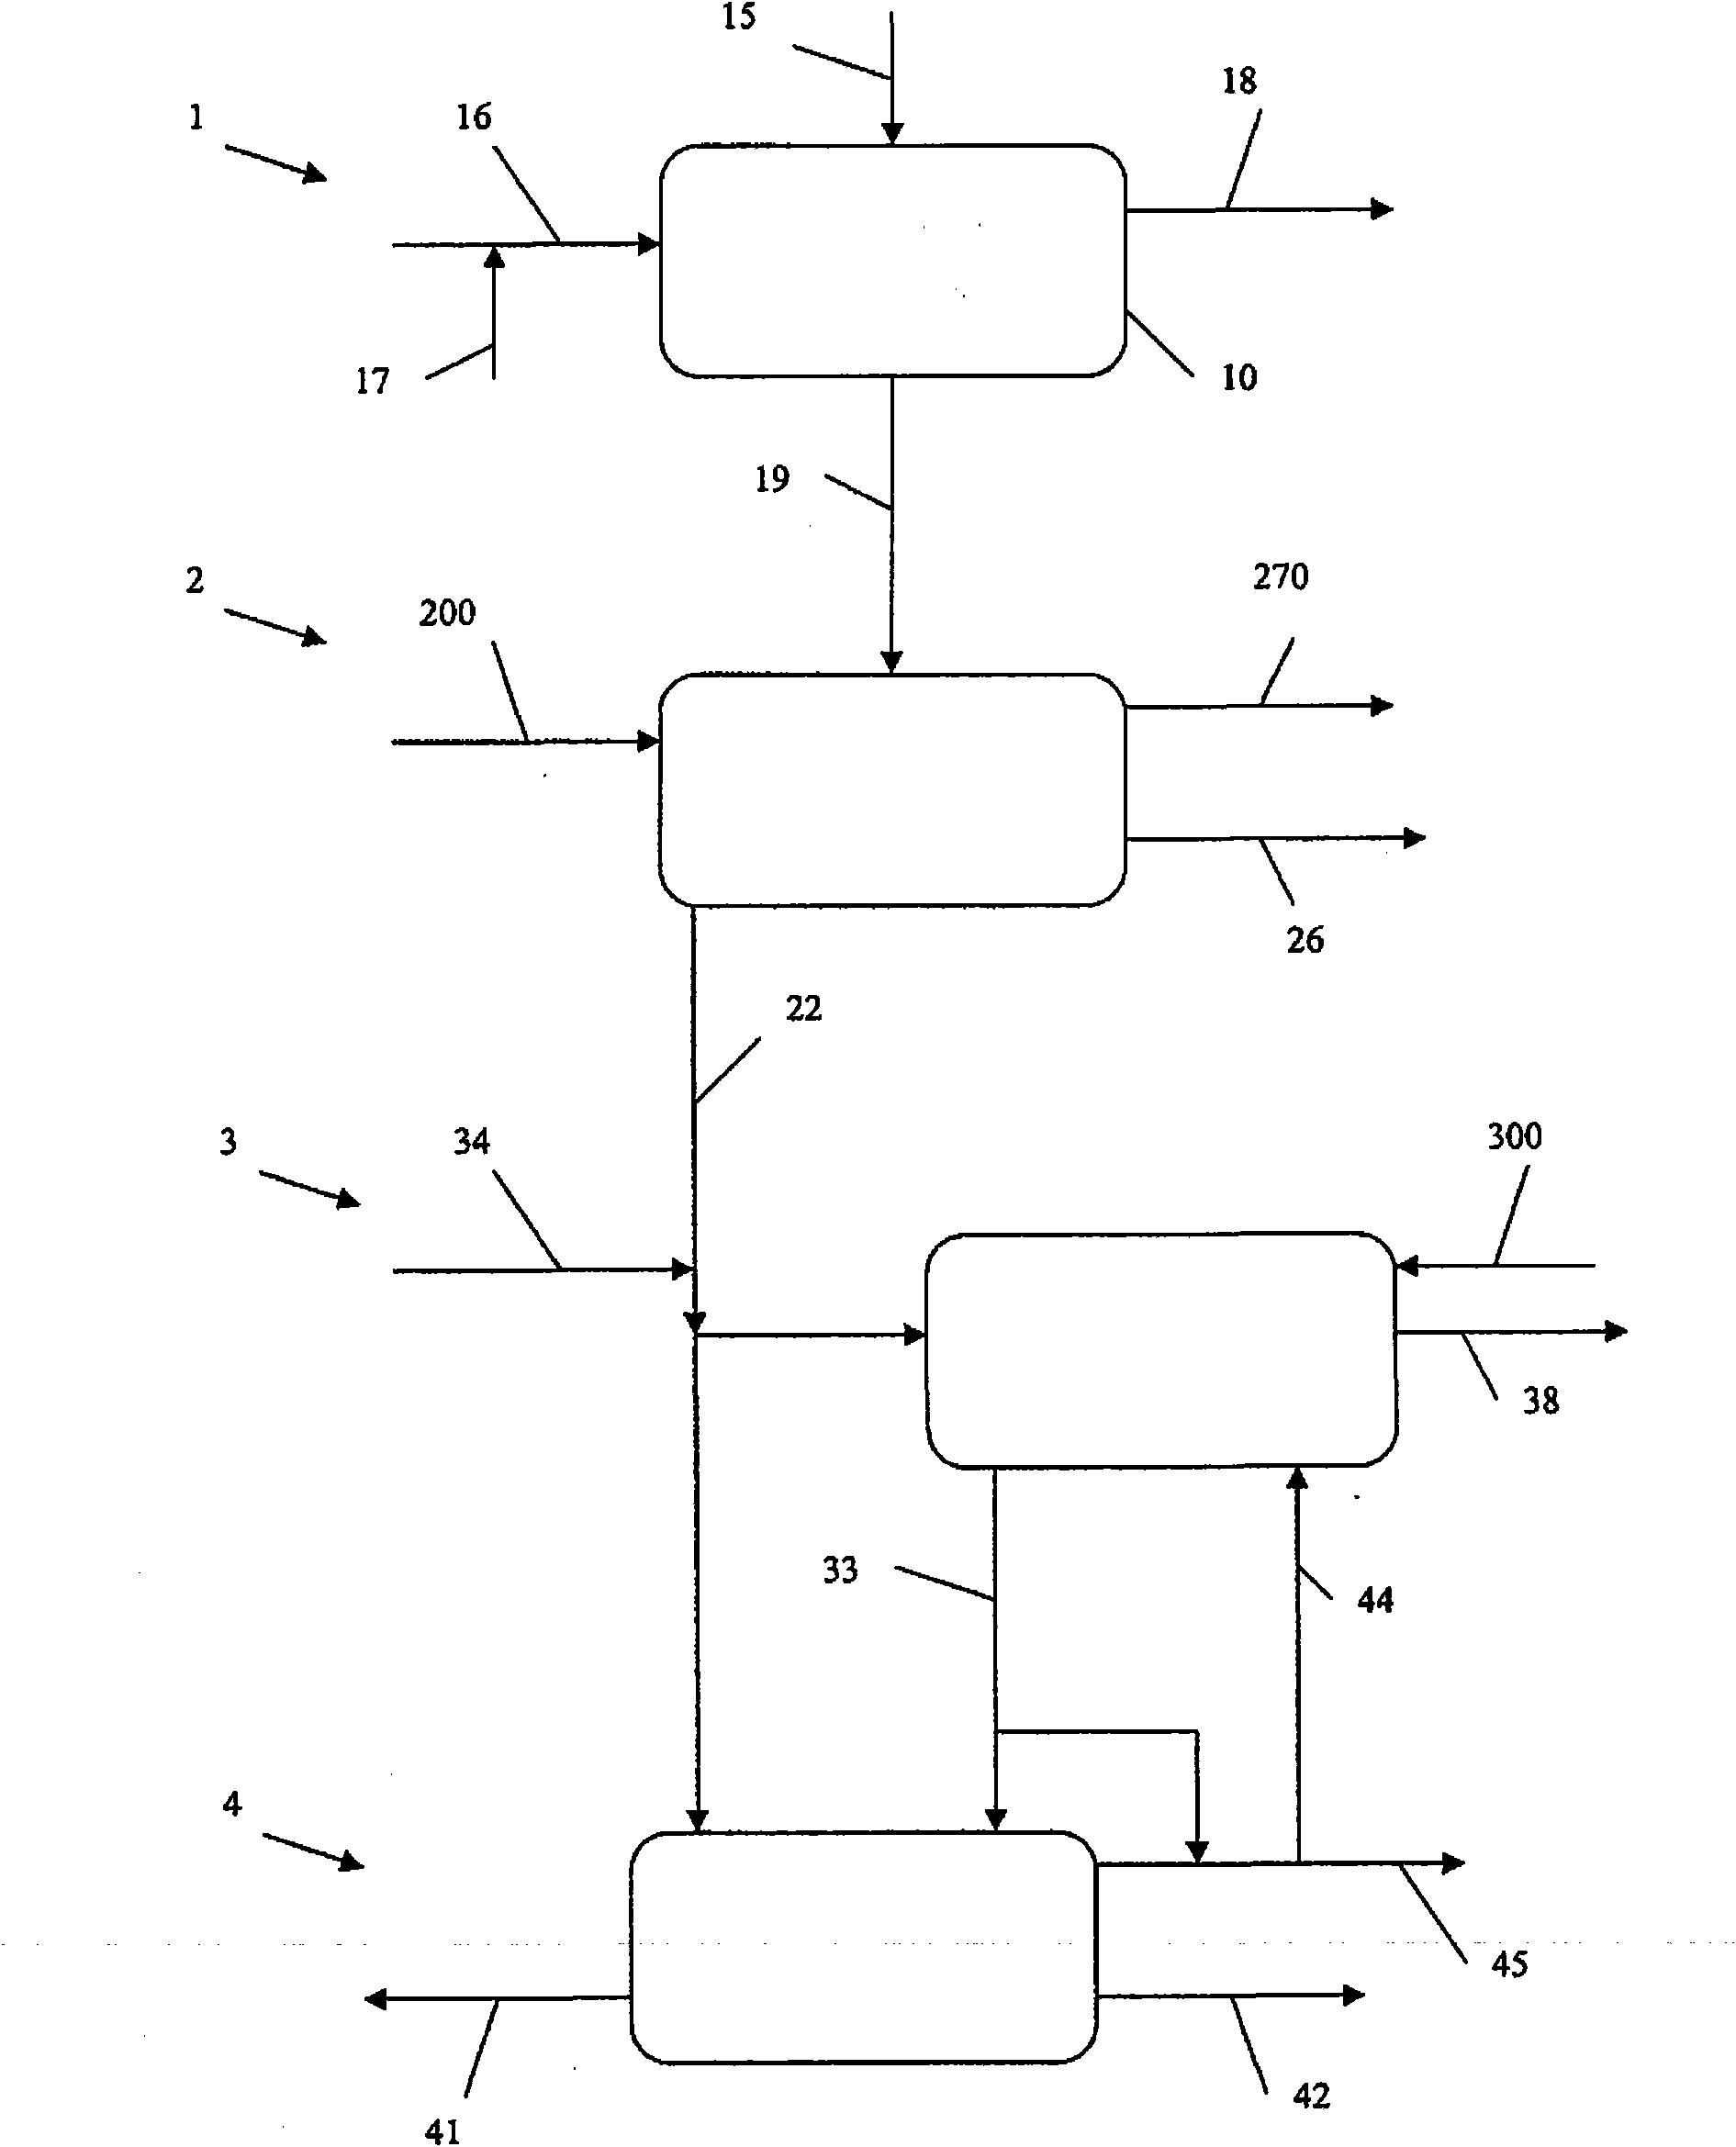 Method and apparatus for the production of high purity tungsten hexafluoride